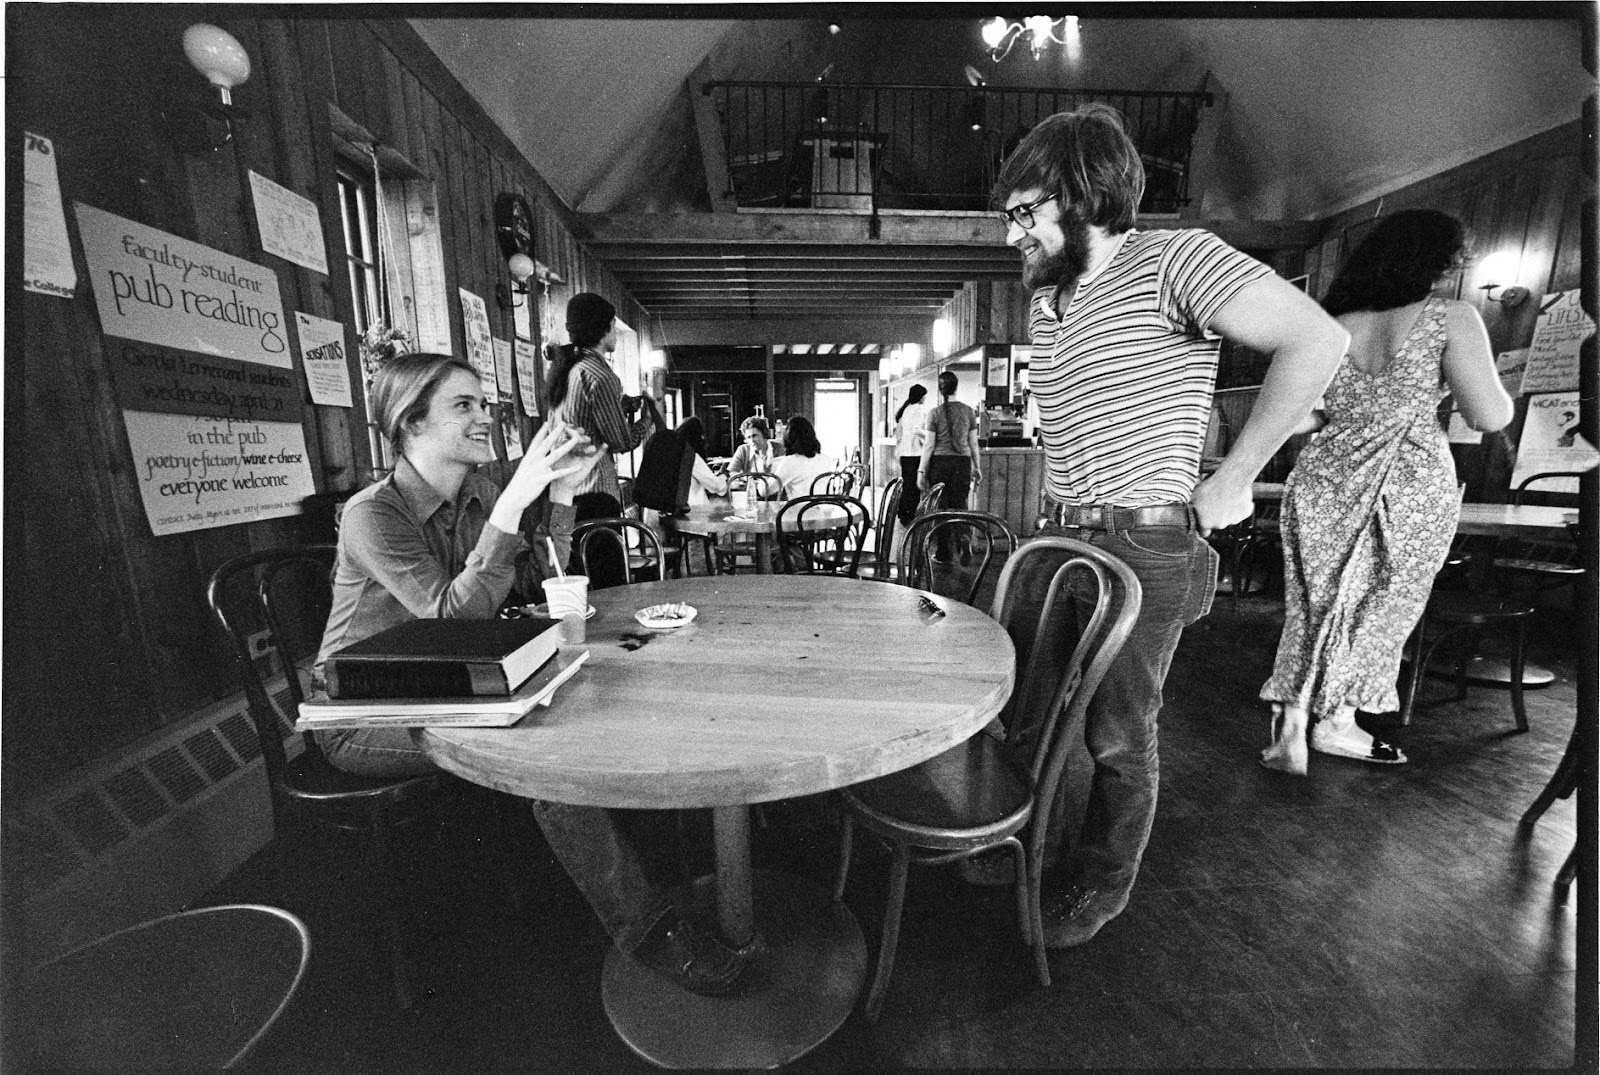  Photo of The Pub, circa late 1970s. Courtesy of Gary Gladstone via the Sarah Lawrence College archives. 